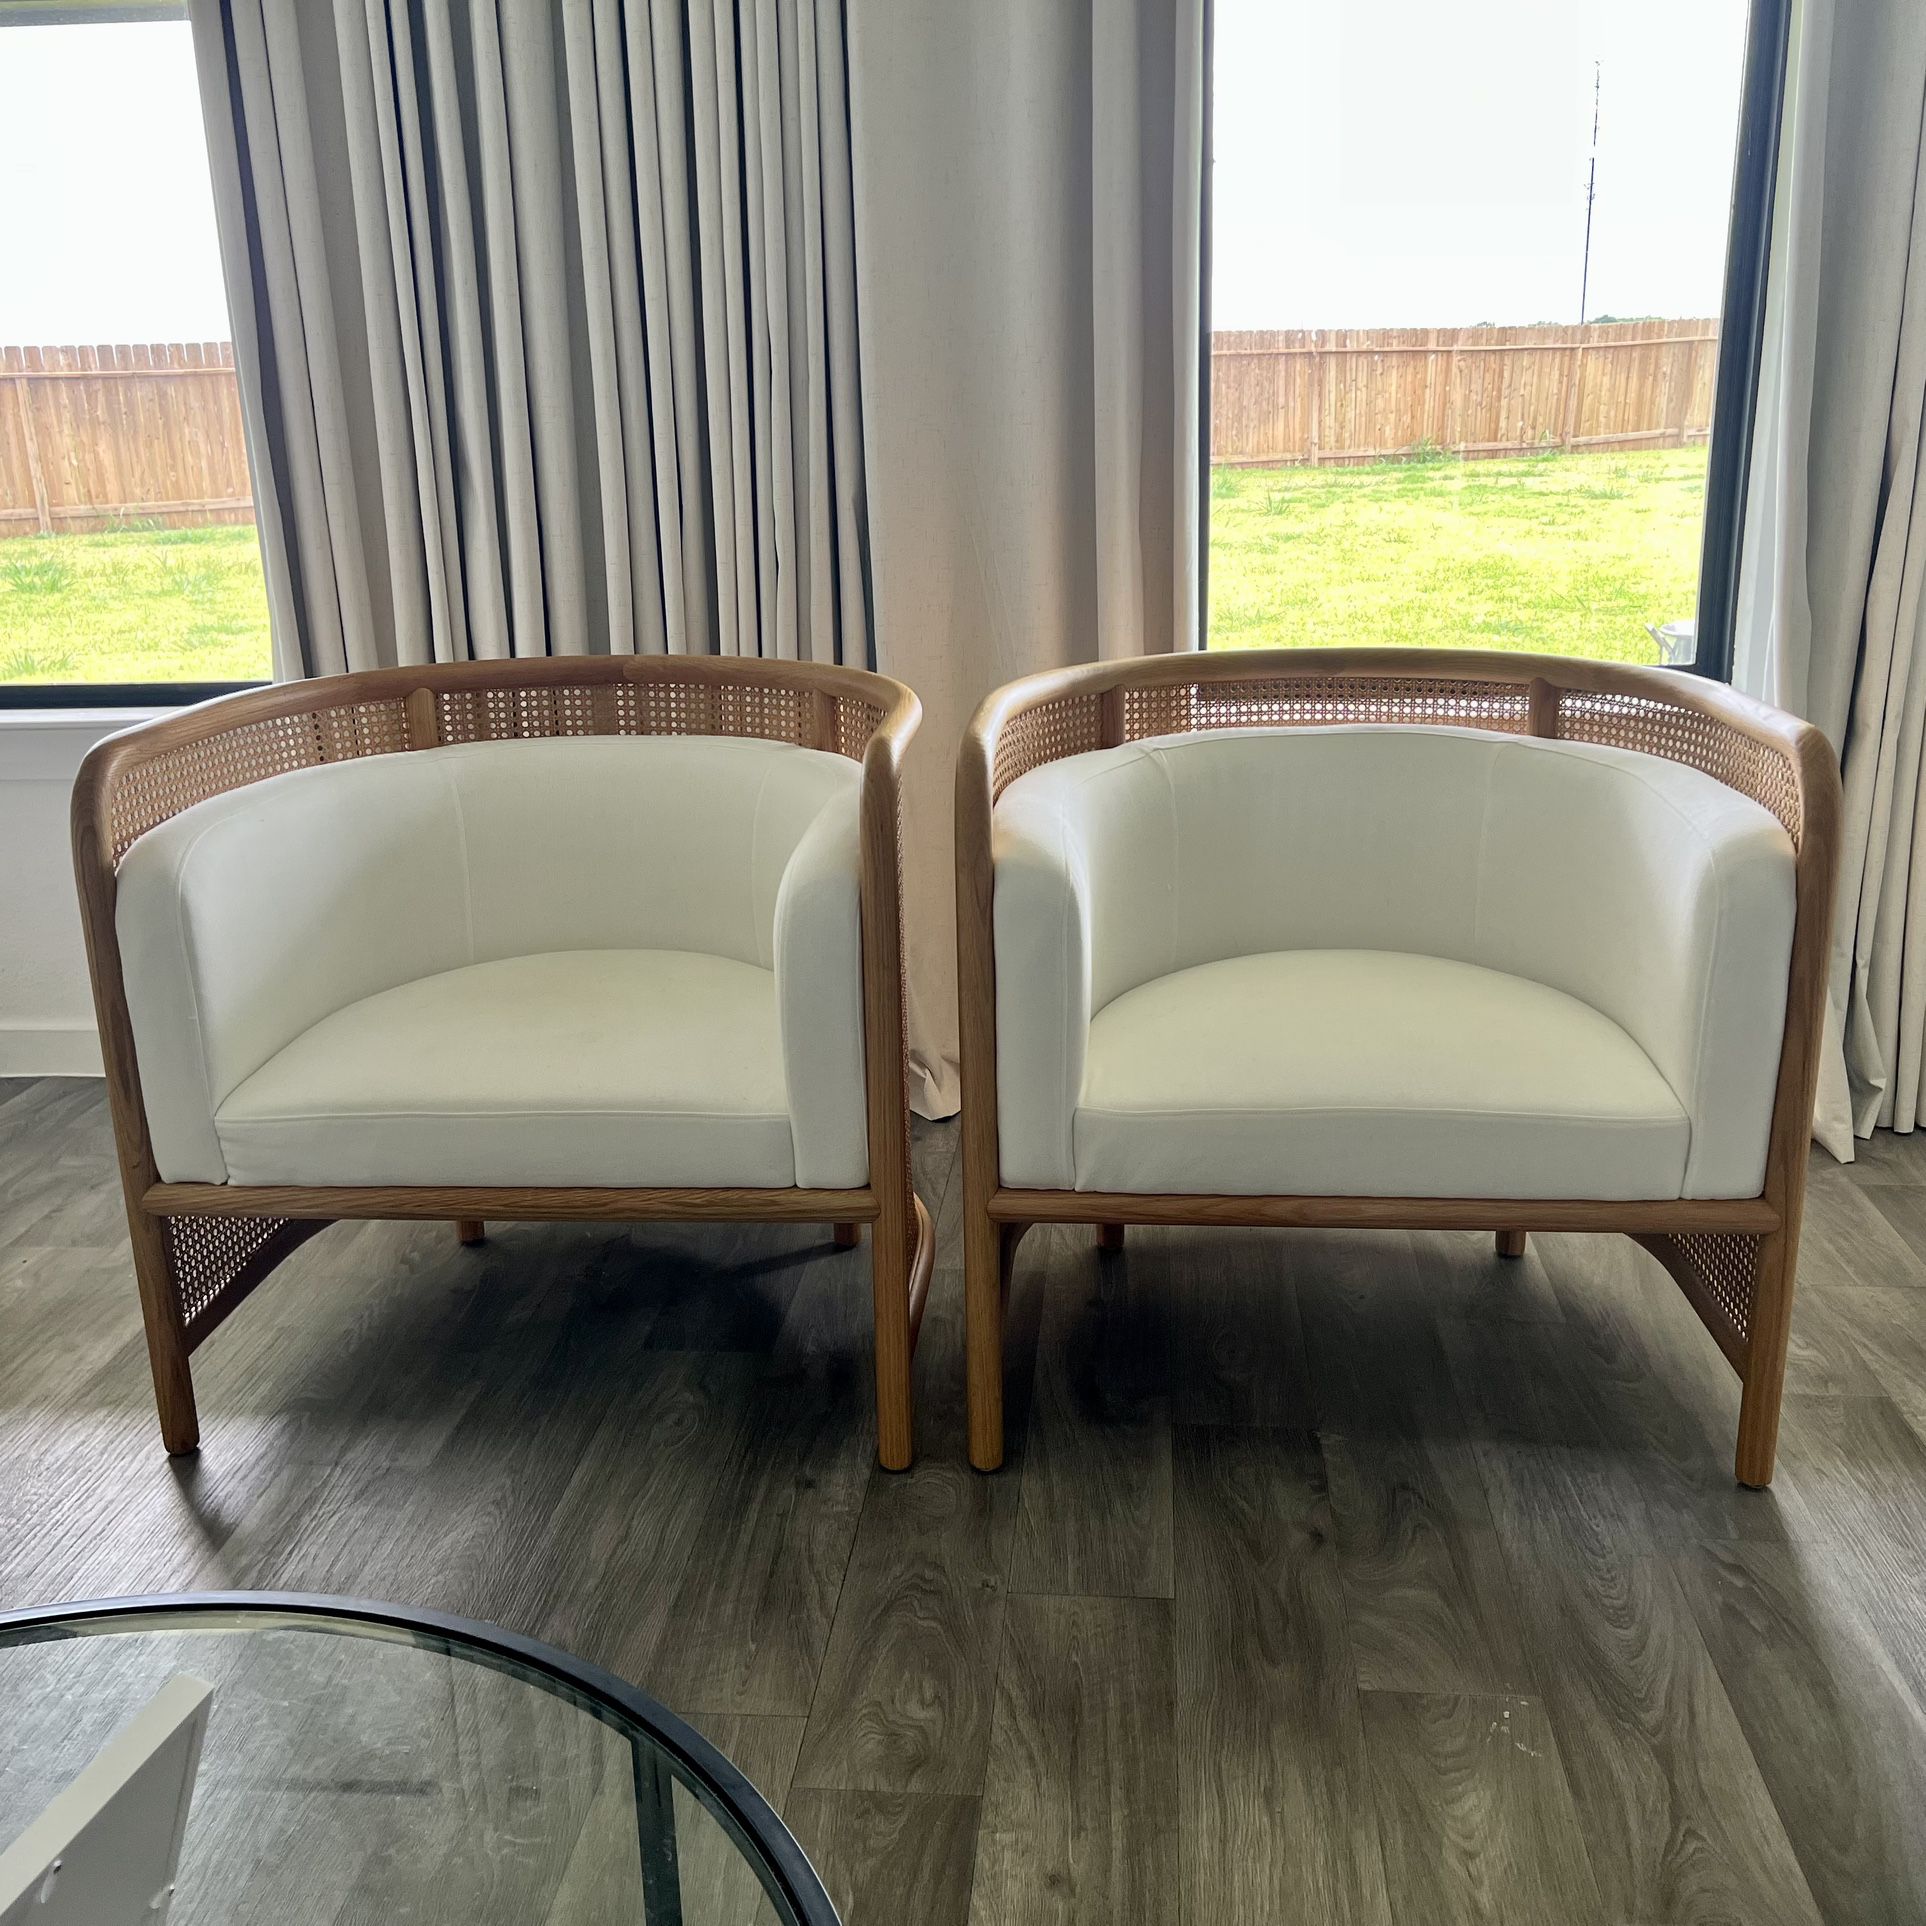 Crate and barrel Fields Cain Back Chair x 2